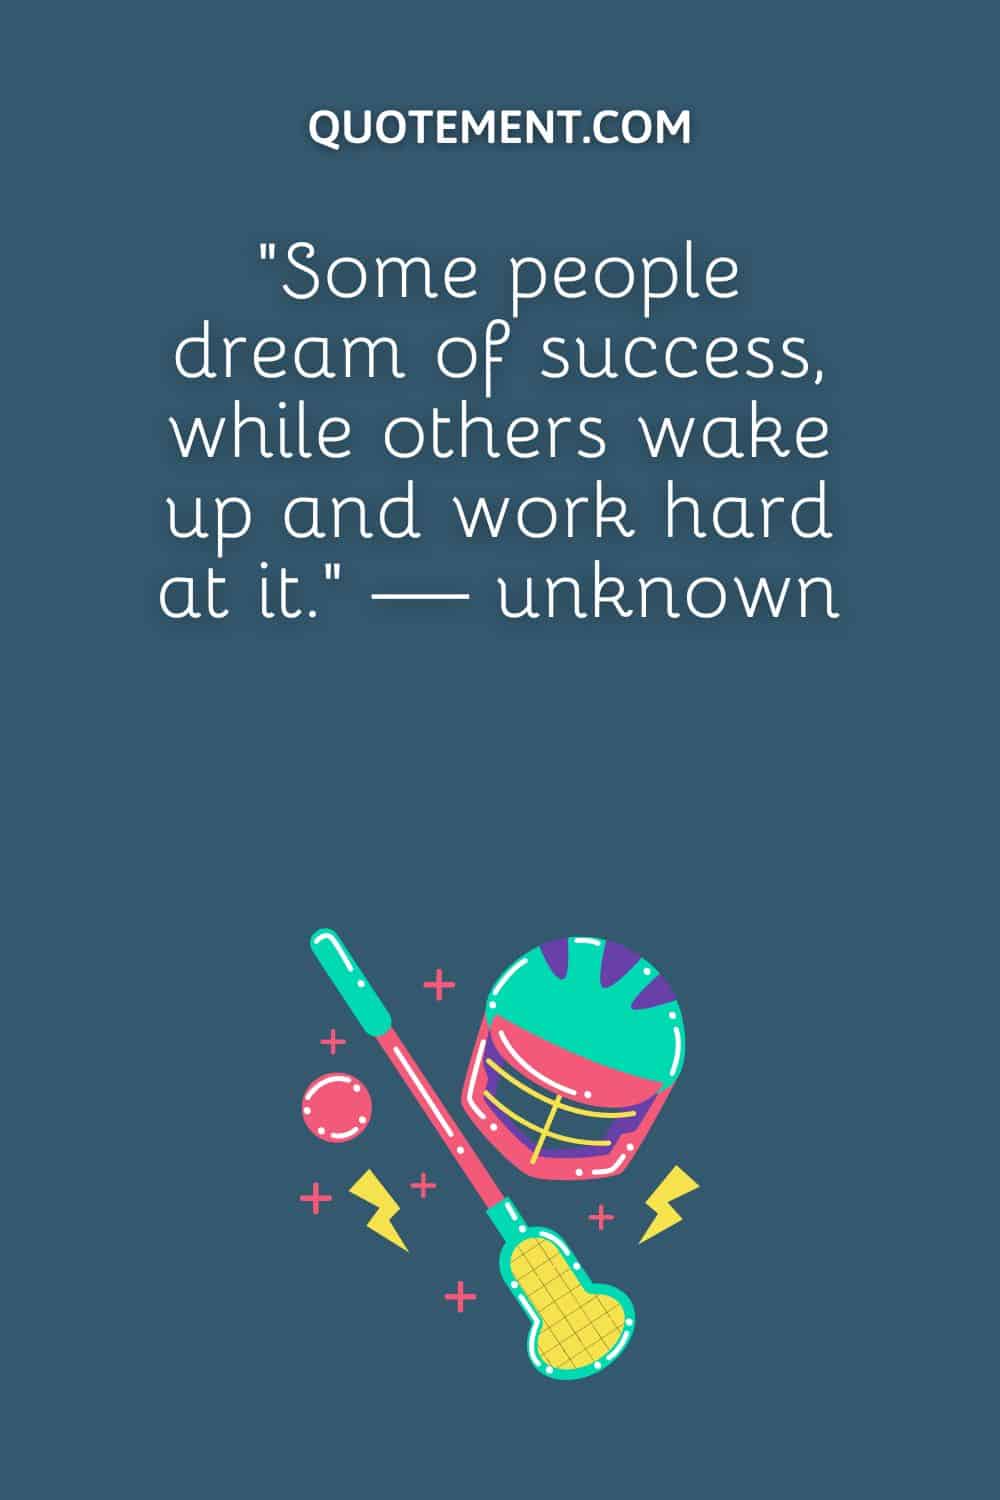 “Some people dream of success, while others wake up and work hard at it.” — unknown